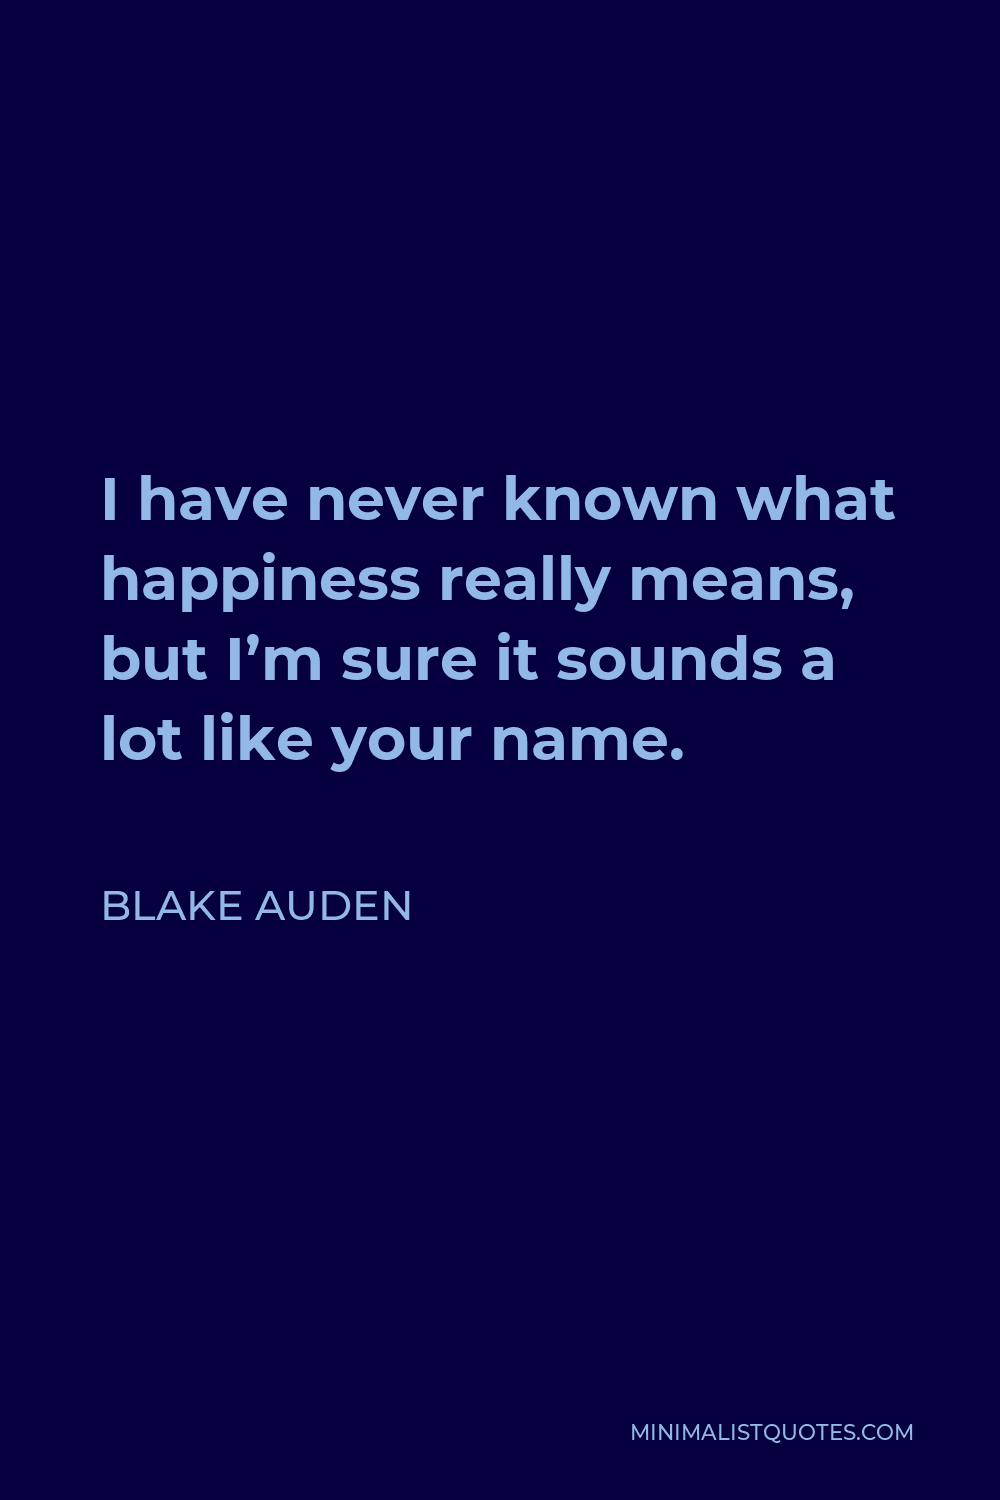 Blake Auden Quote - I have never known what happiness really means, but I’m sure it sounds a lot like your name.